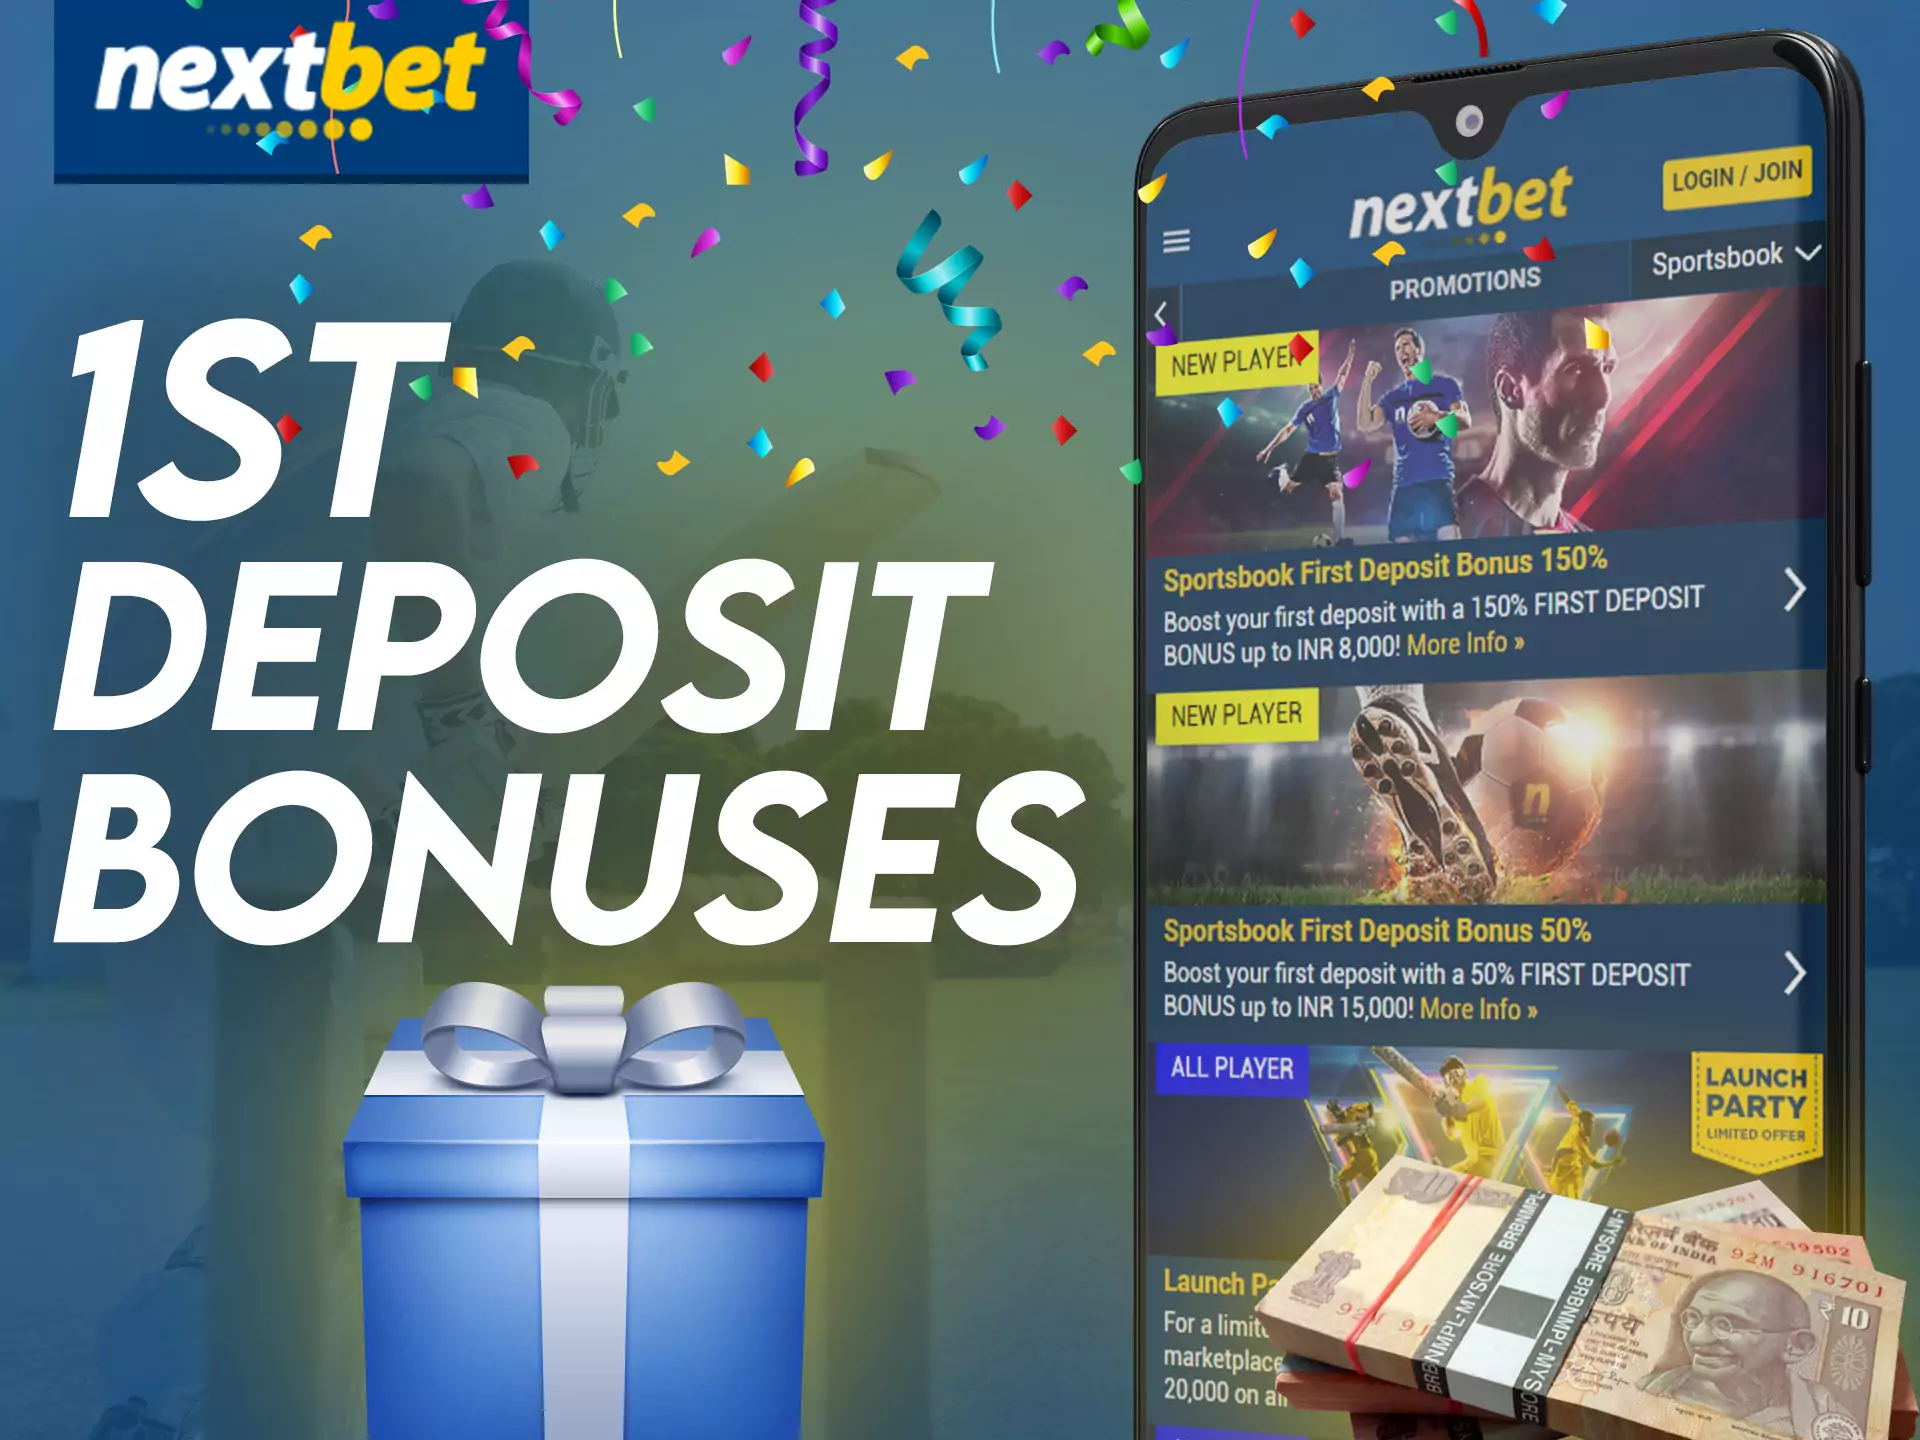 Get a special bonus for your first deposit in the Nextbet app.